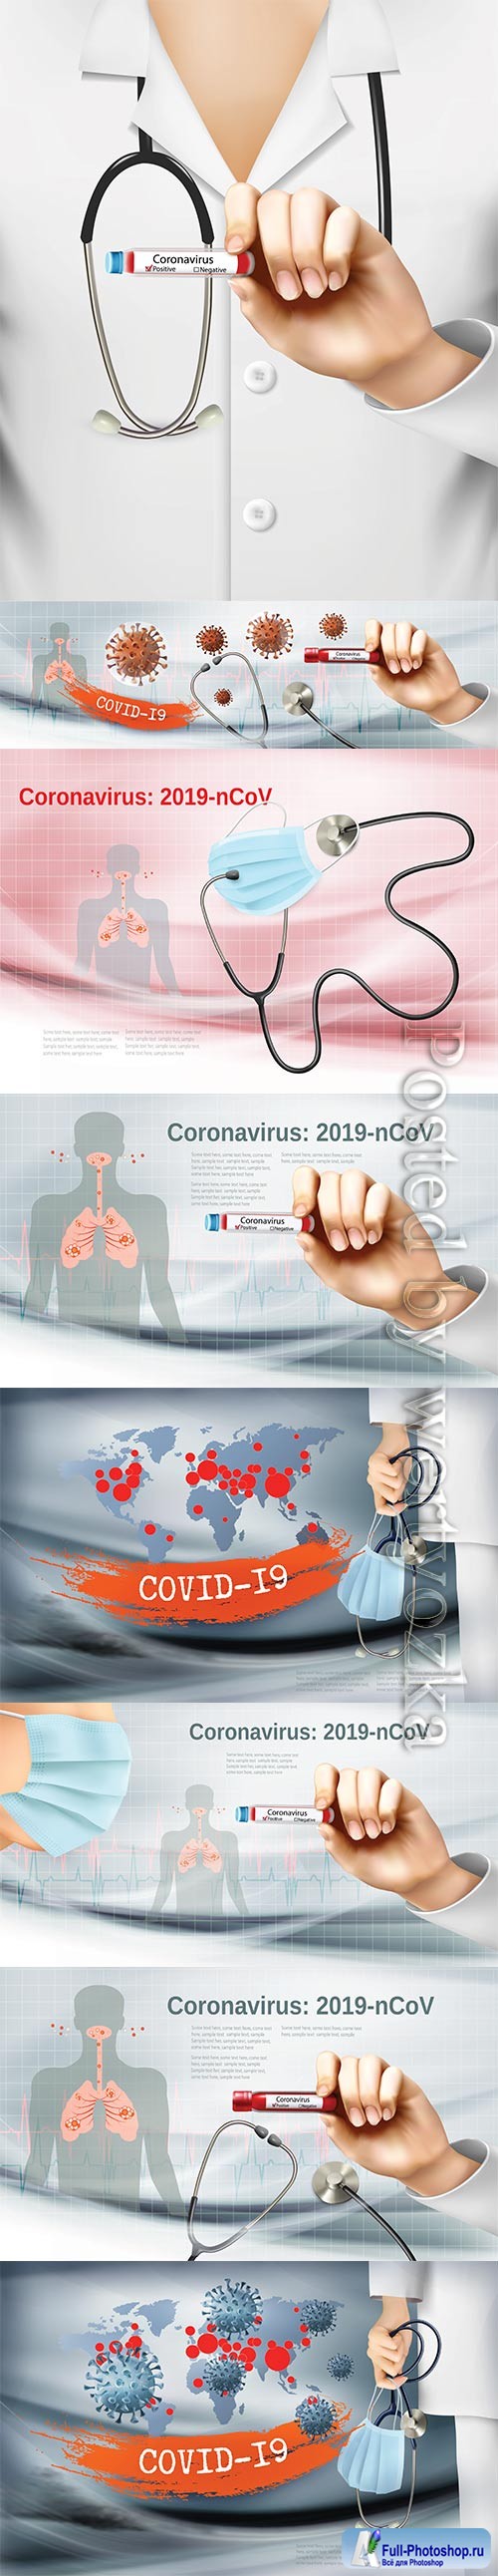 Coranavirus background with doctor holding tube with pasitiv test and stethoscope